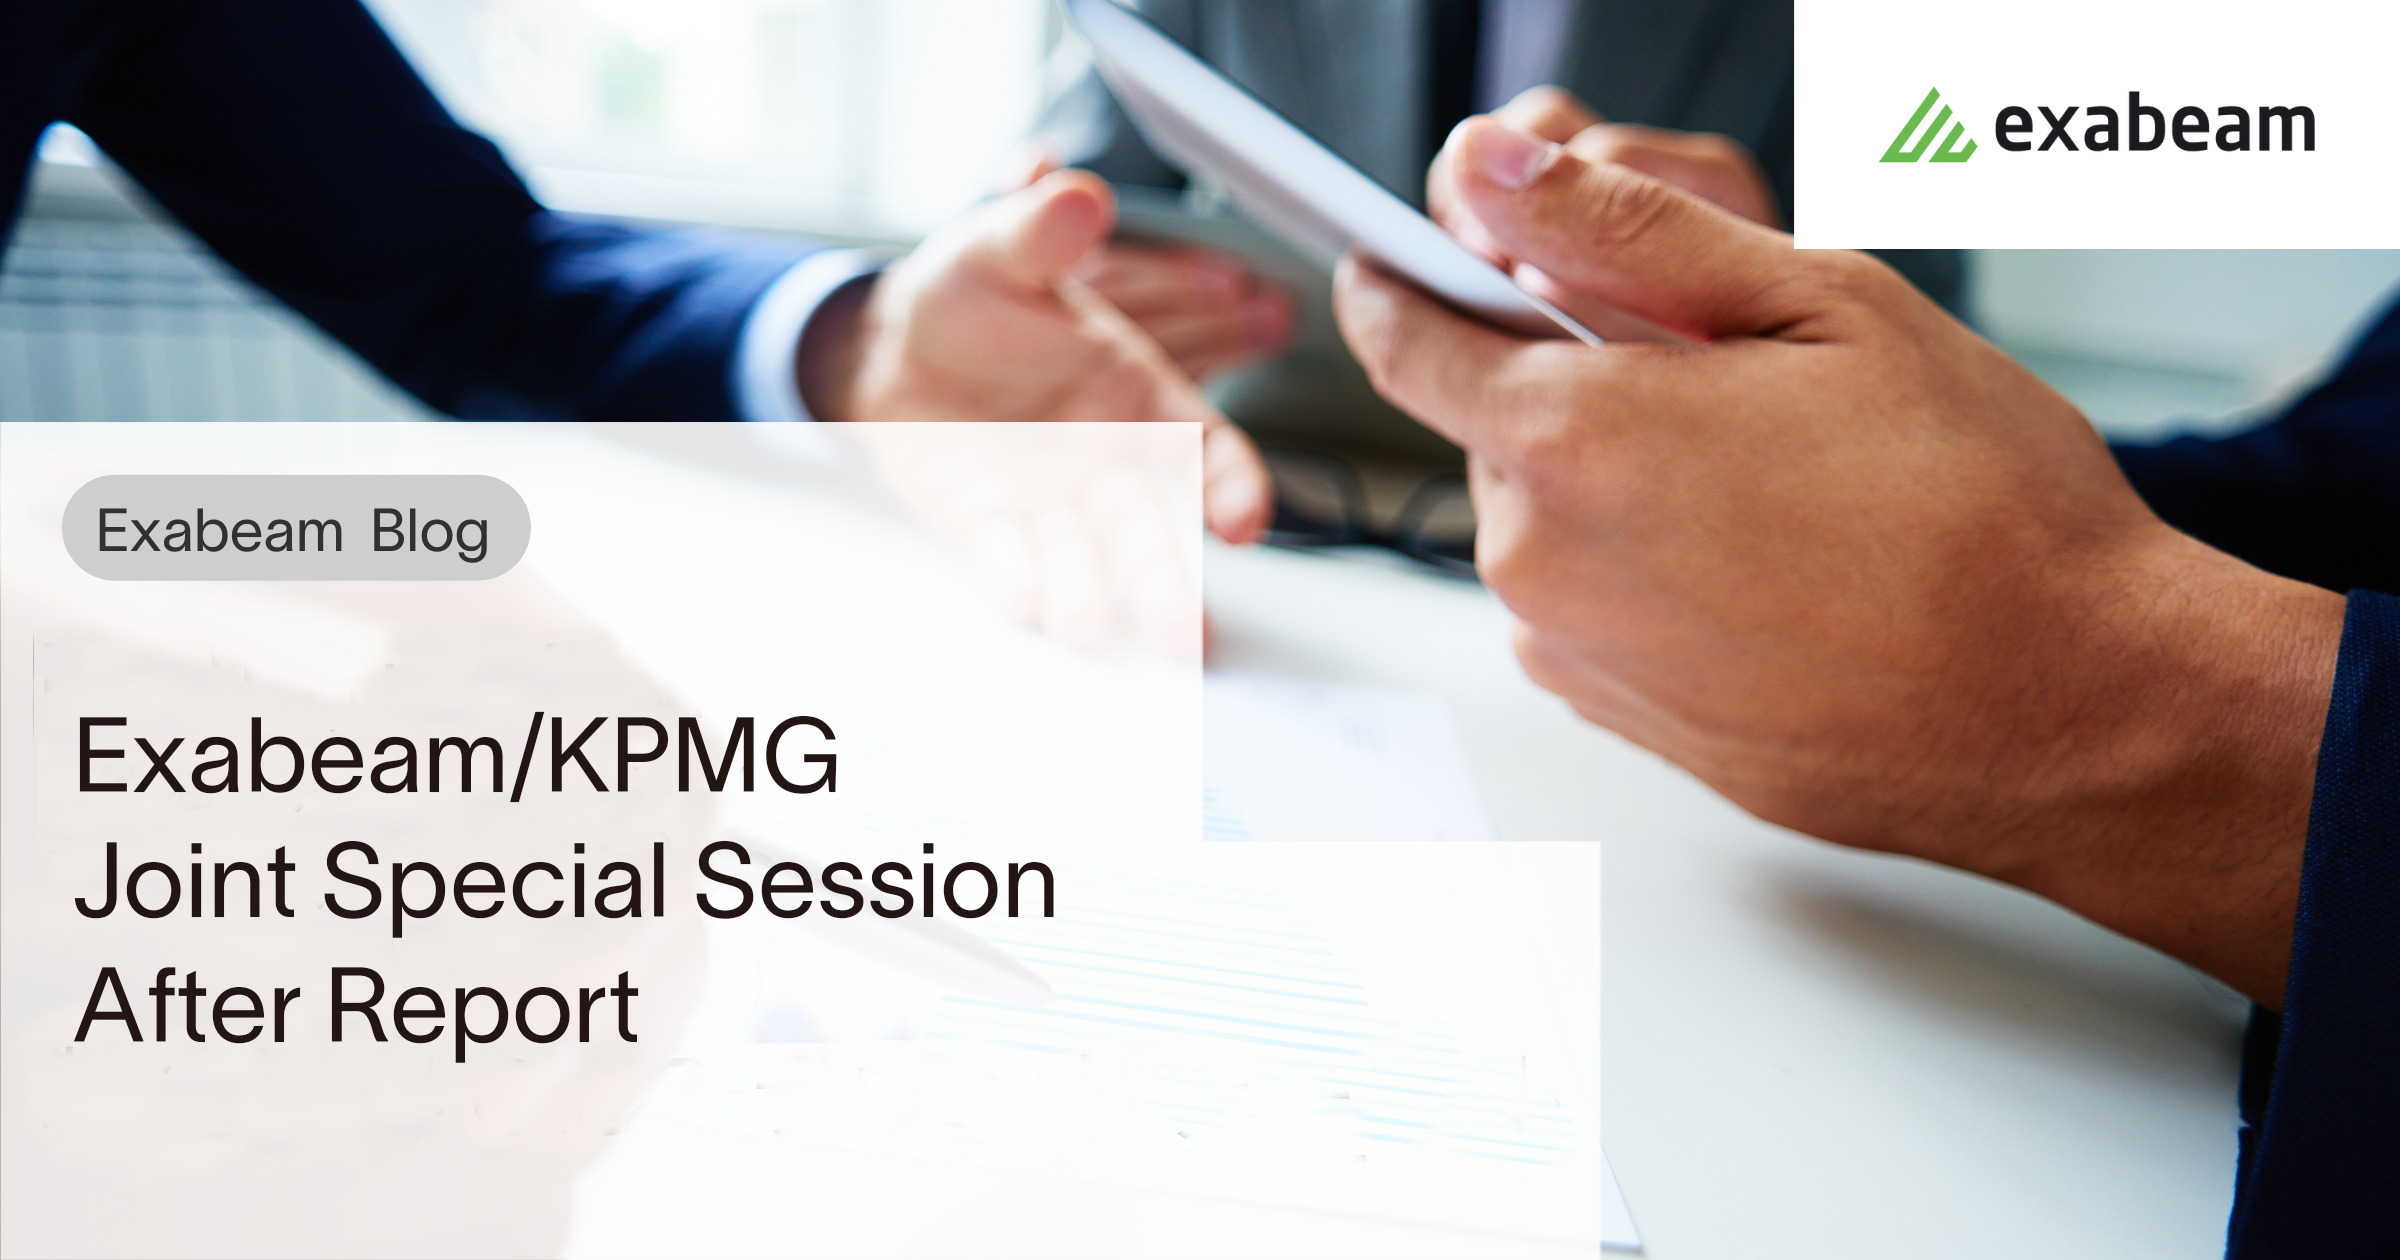 Exabeam/KPMG Joint Special Session After Report